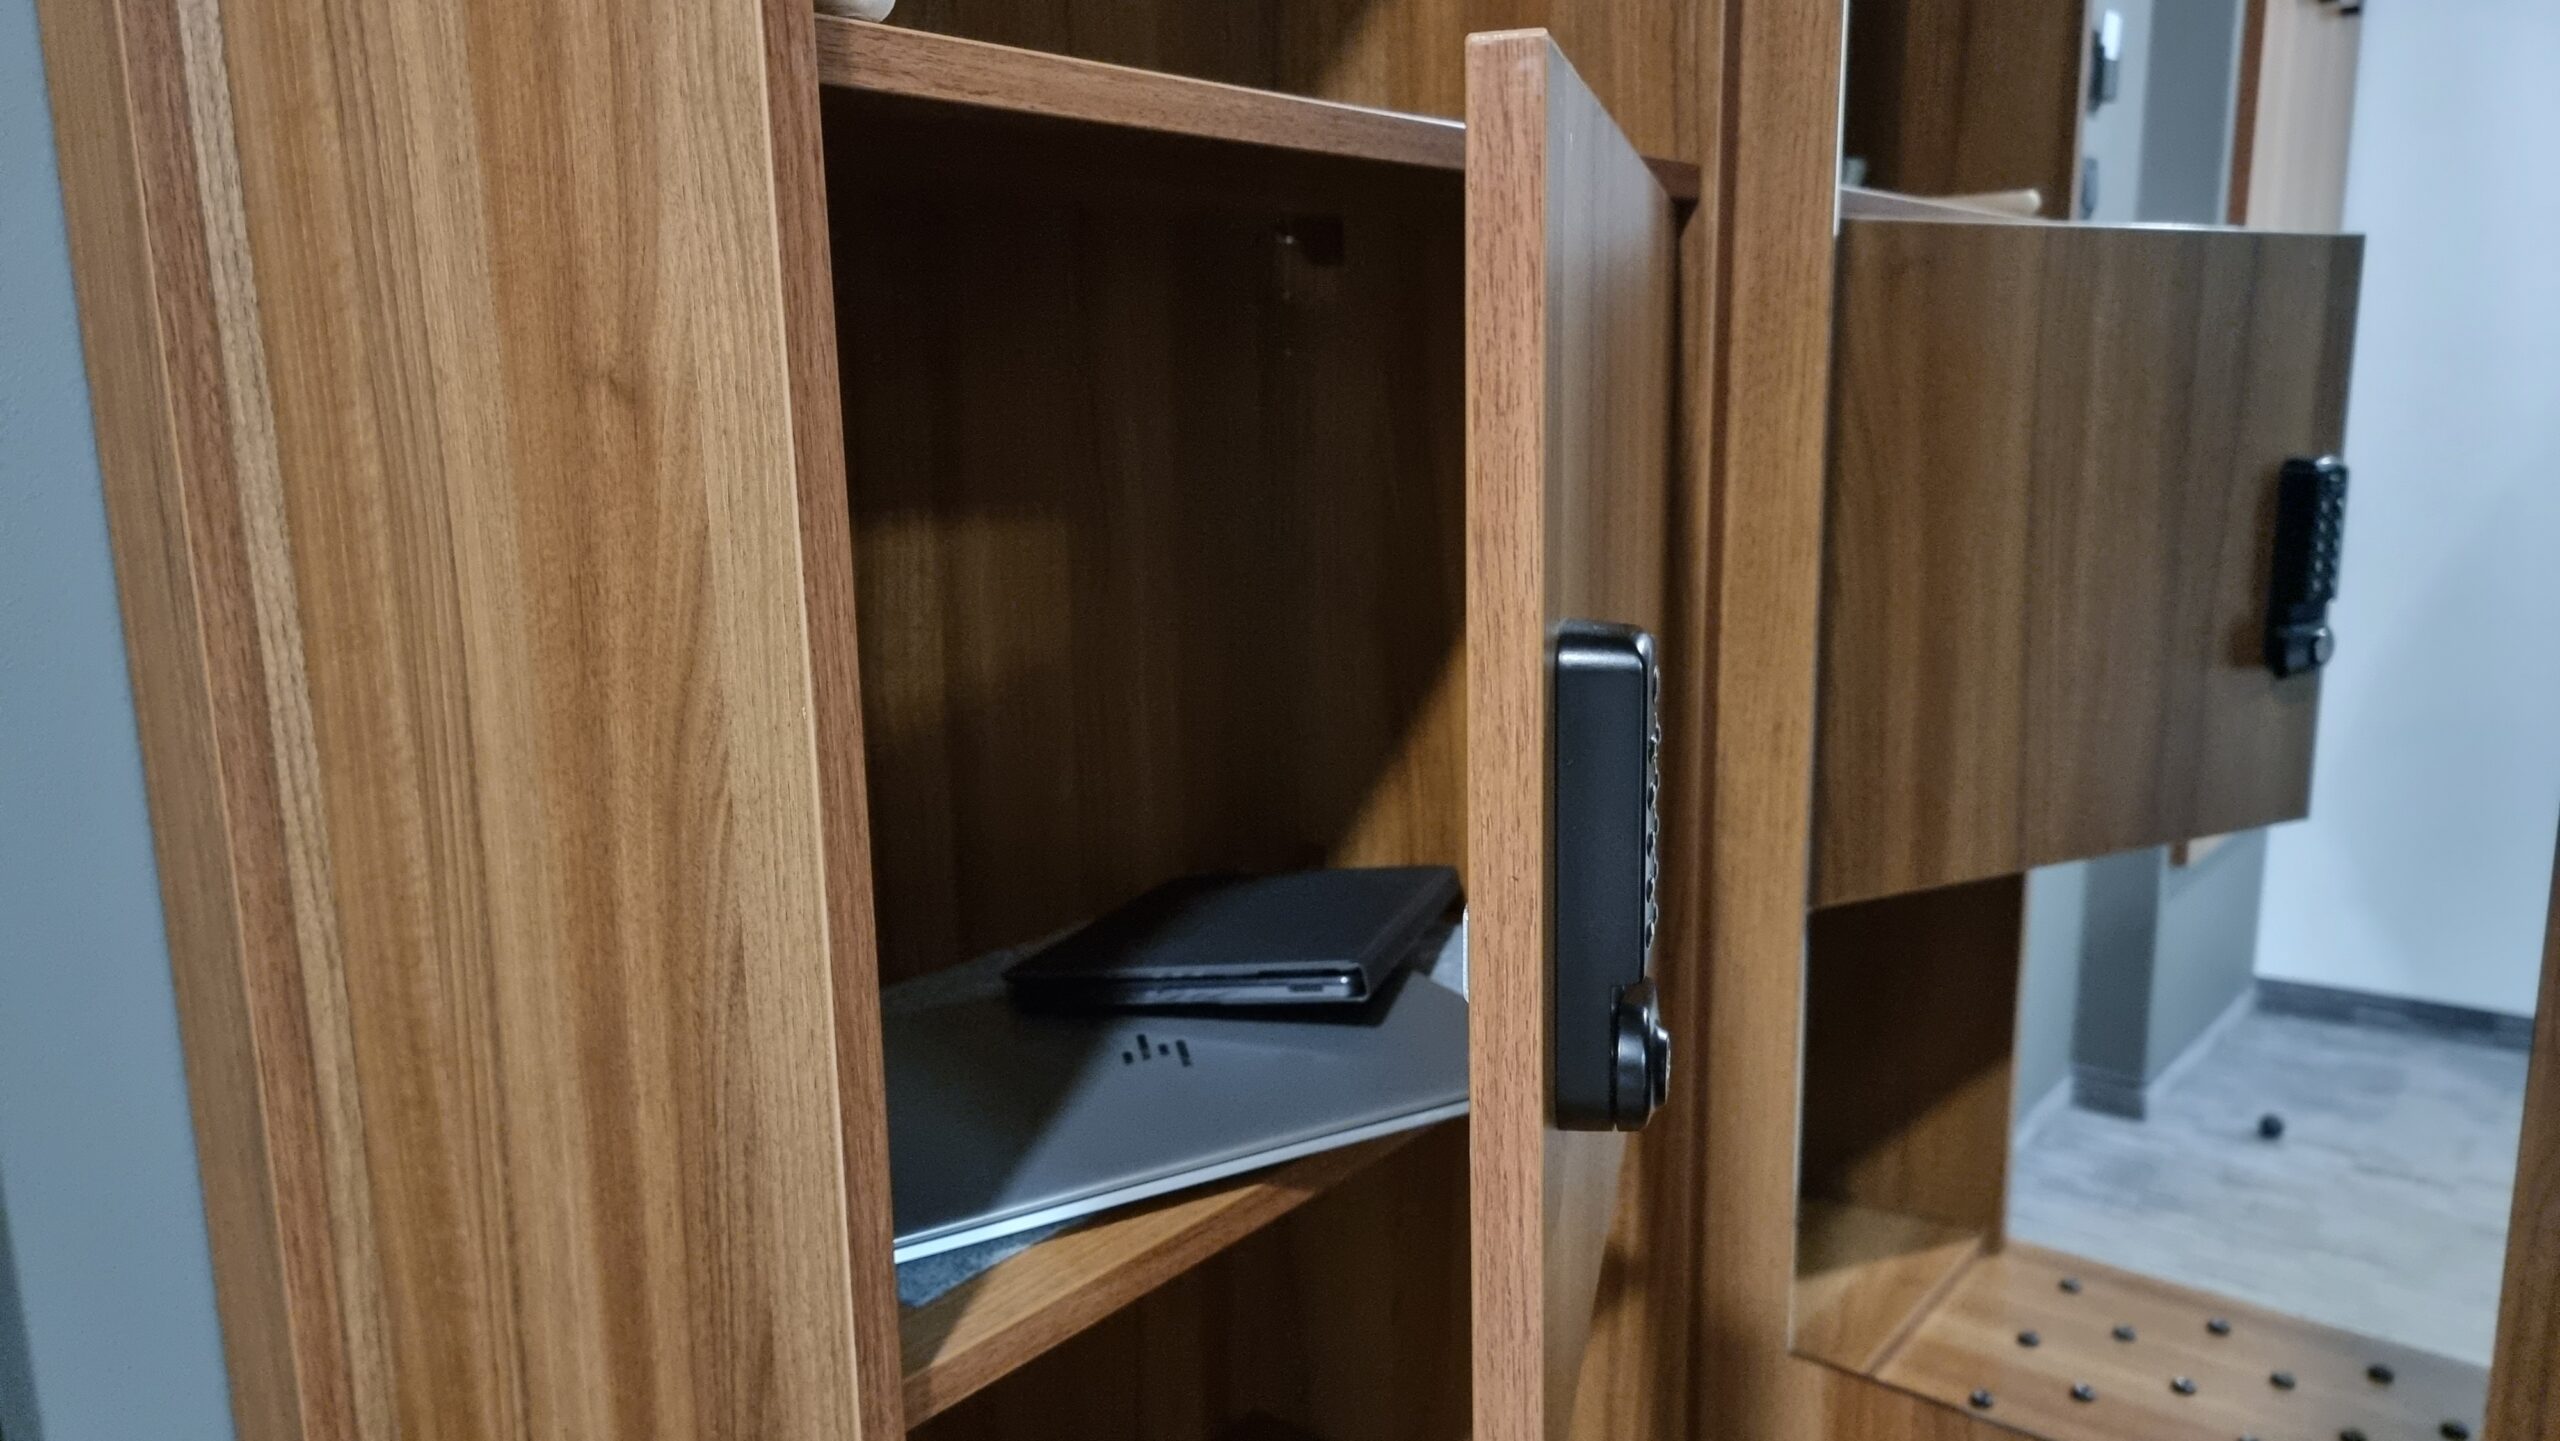 Digital Lock fitted on guest lockers at Best Western Hotel, Poland